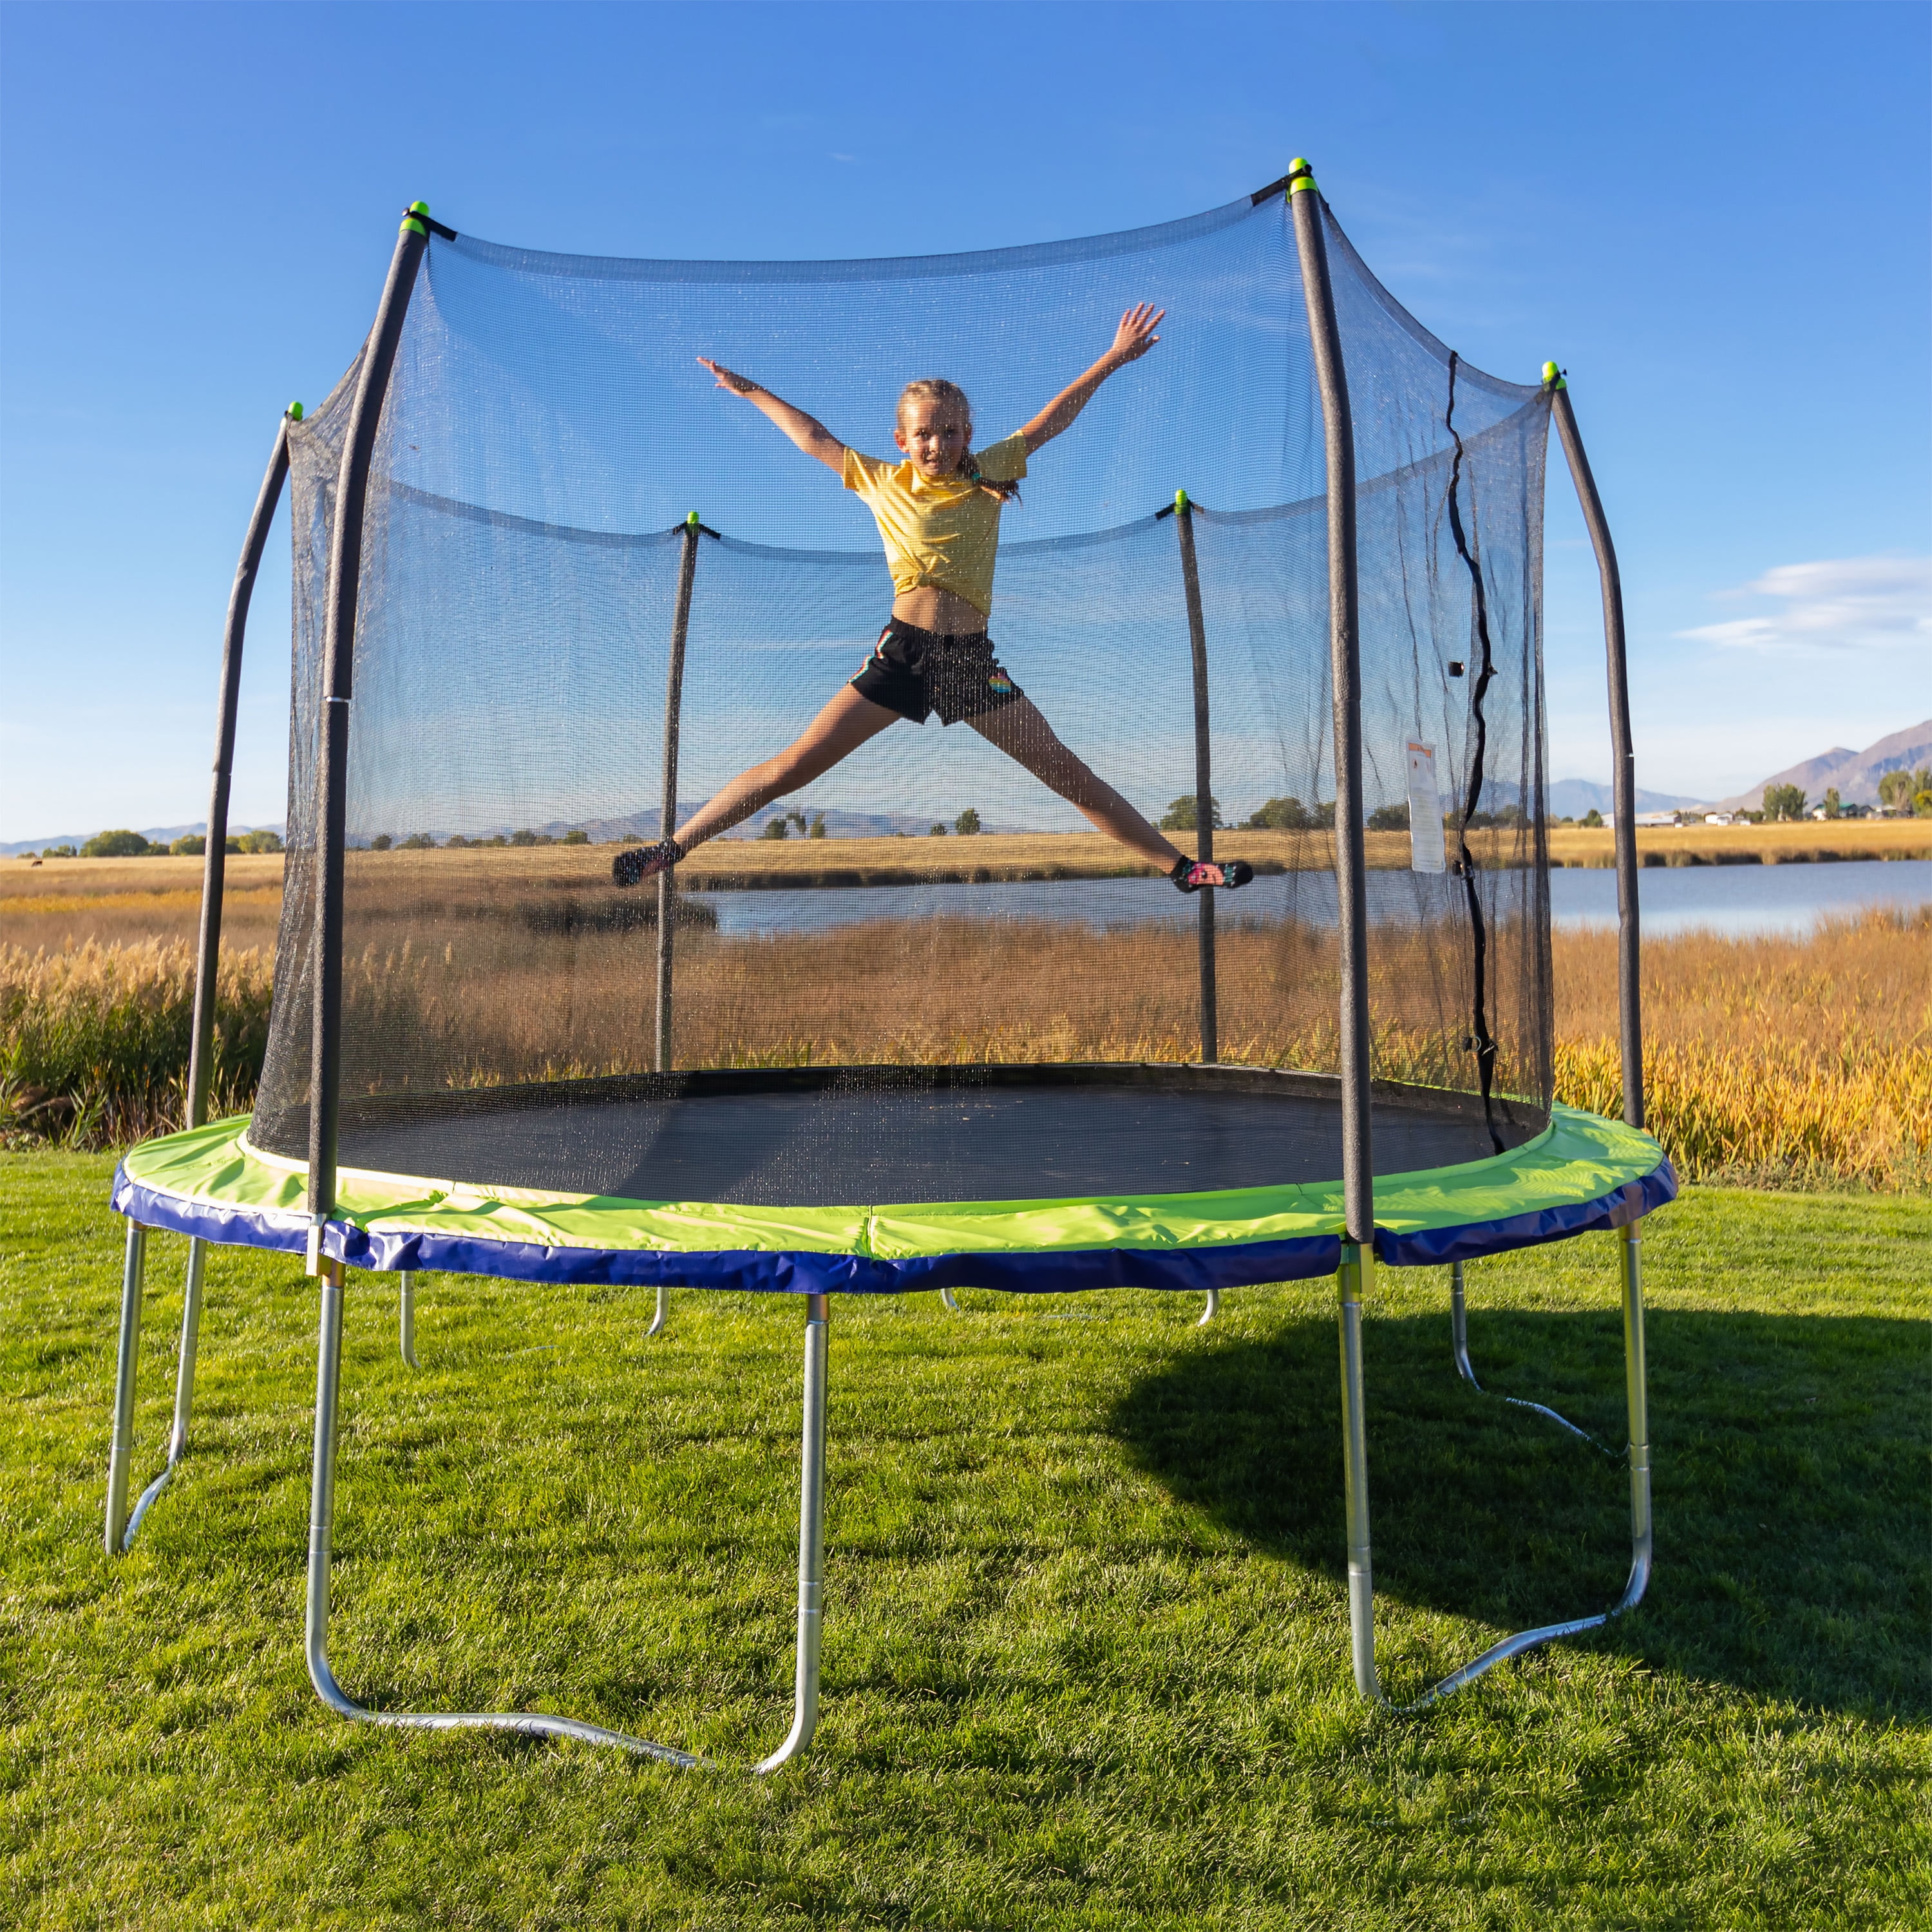 MIARHB 12 FT Kids Trampoline Suitable for Indoor and Outdoor Garden Workout use Fitness Trampolines Mini Trampoline with Enclosure Net